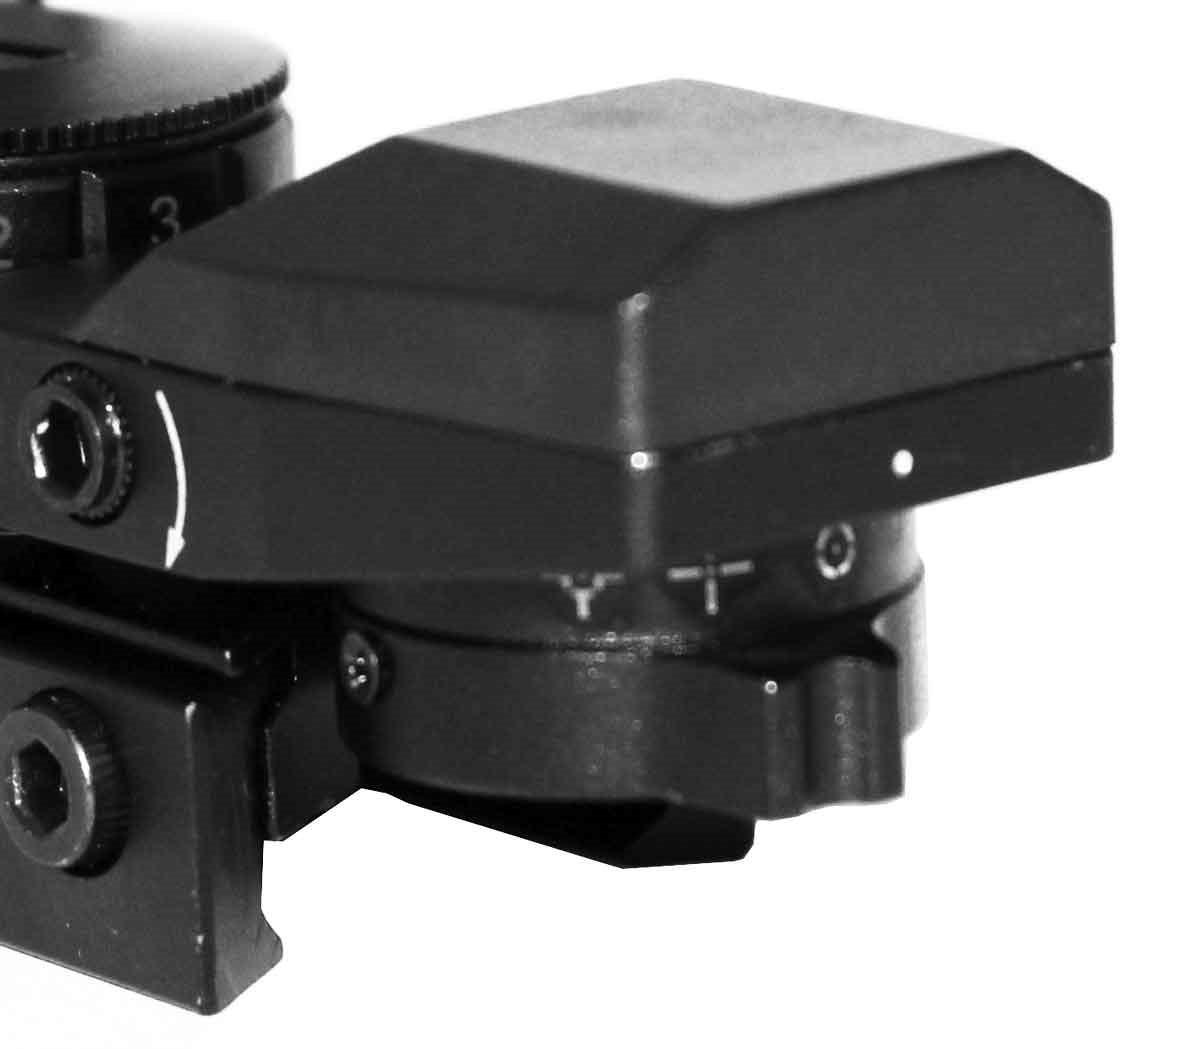 Tactical Reflex Sight With 4 Reticles With Base Mount Compatible With Marlin 336 Rifle.